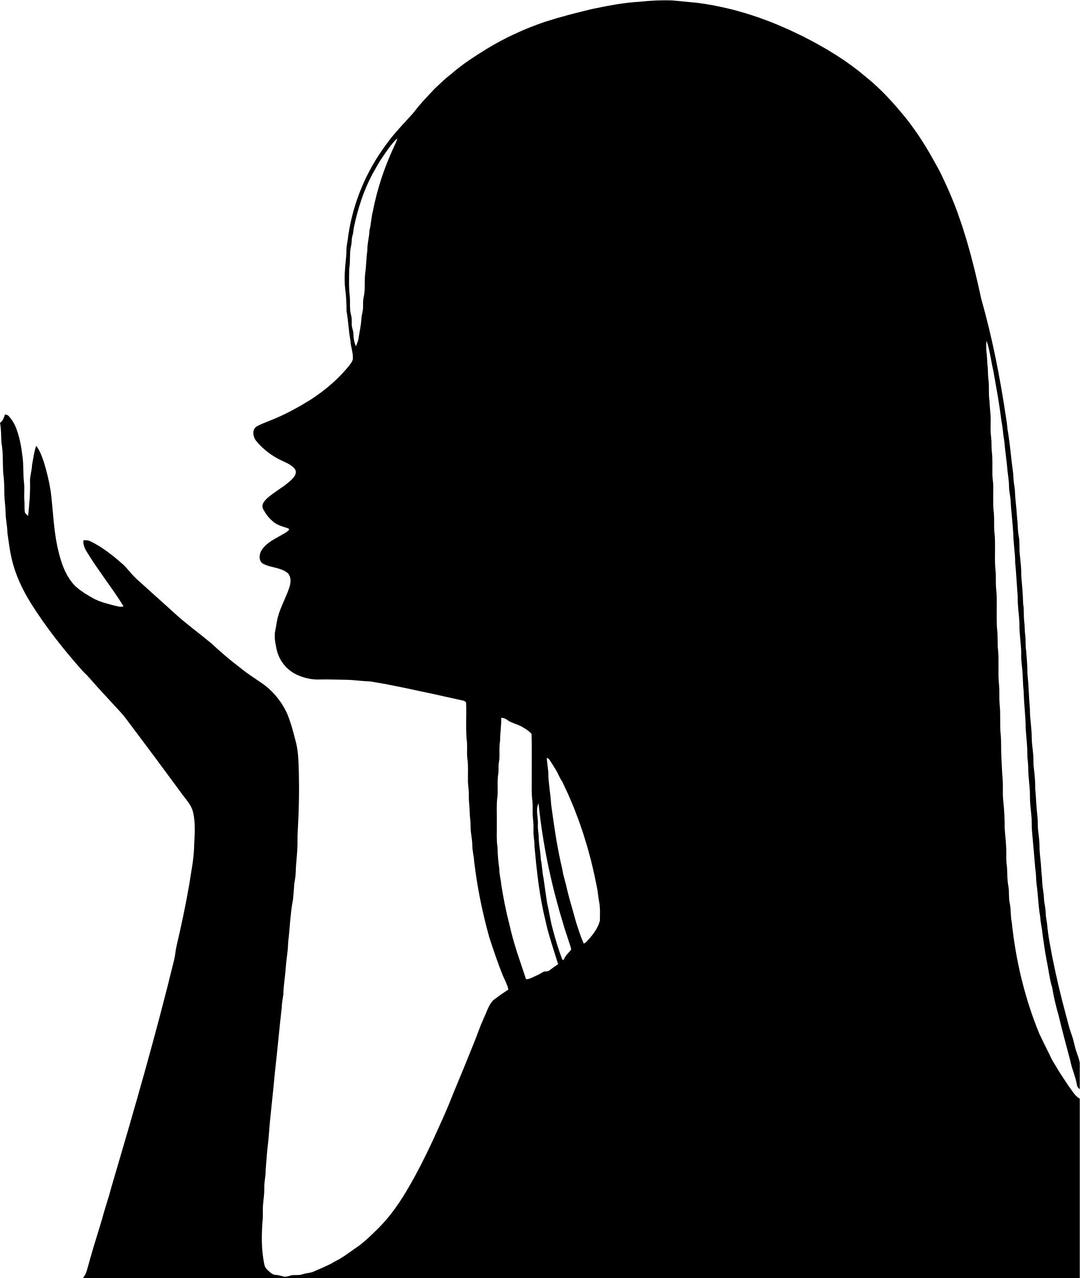 Girl Blowing Into Palm Silhouette png transparent